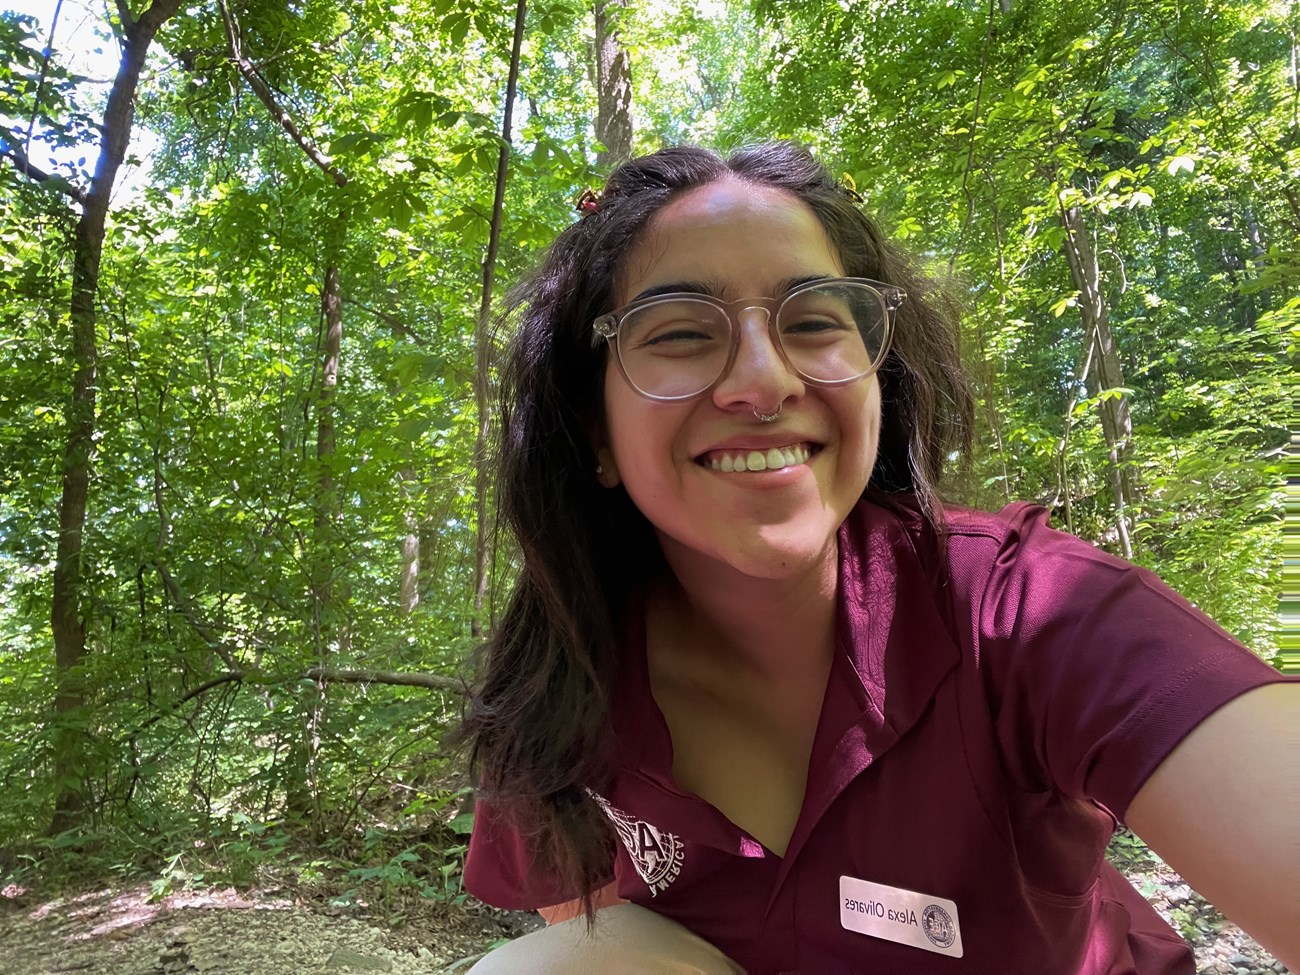 Intern Alexa Olivares at GWMP- Turkey Run Park. They are taking a selfie in nature wearing an ACE shirt, glasses, and a hair clip.